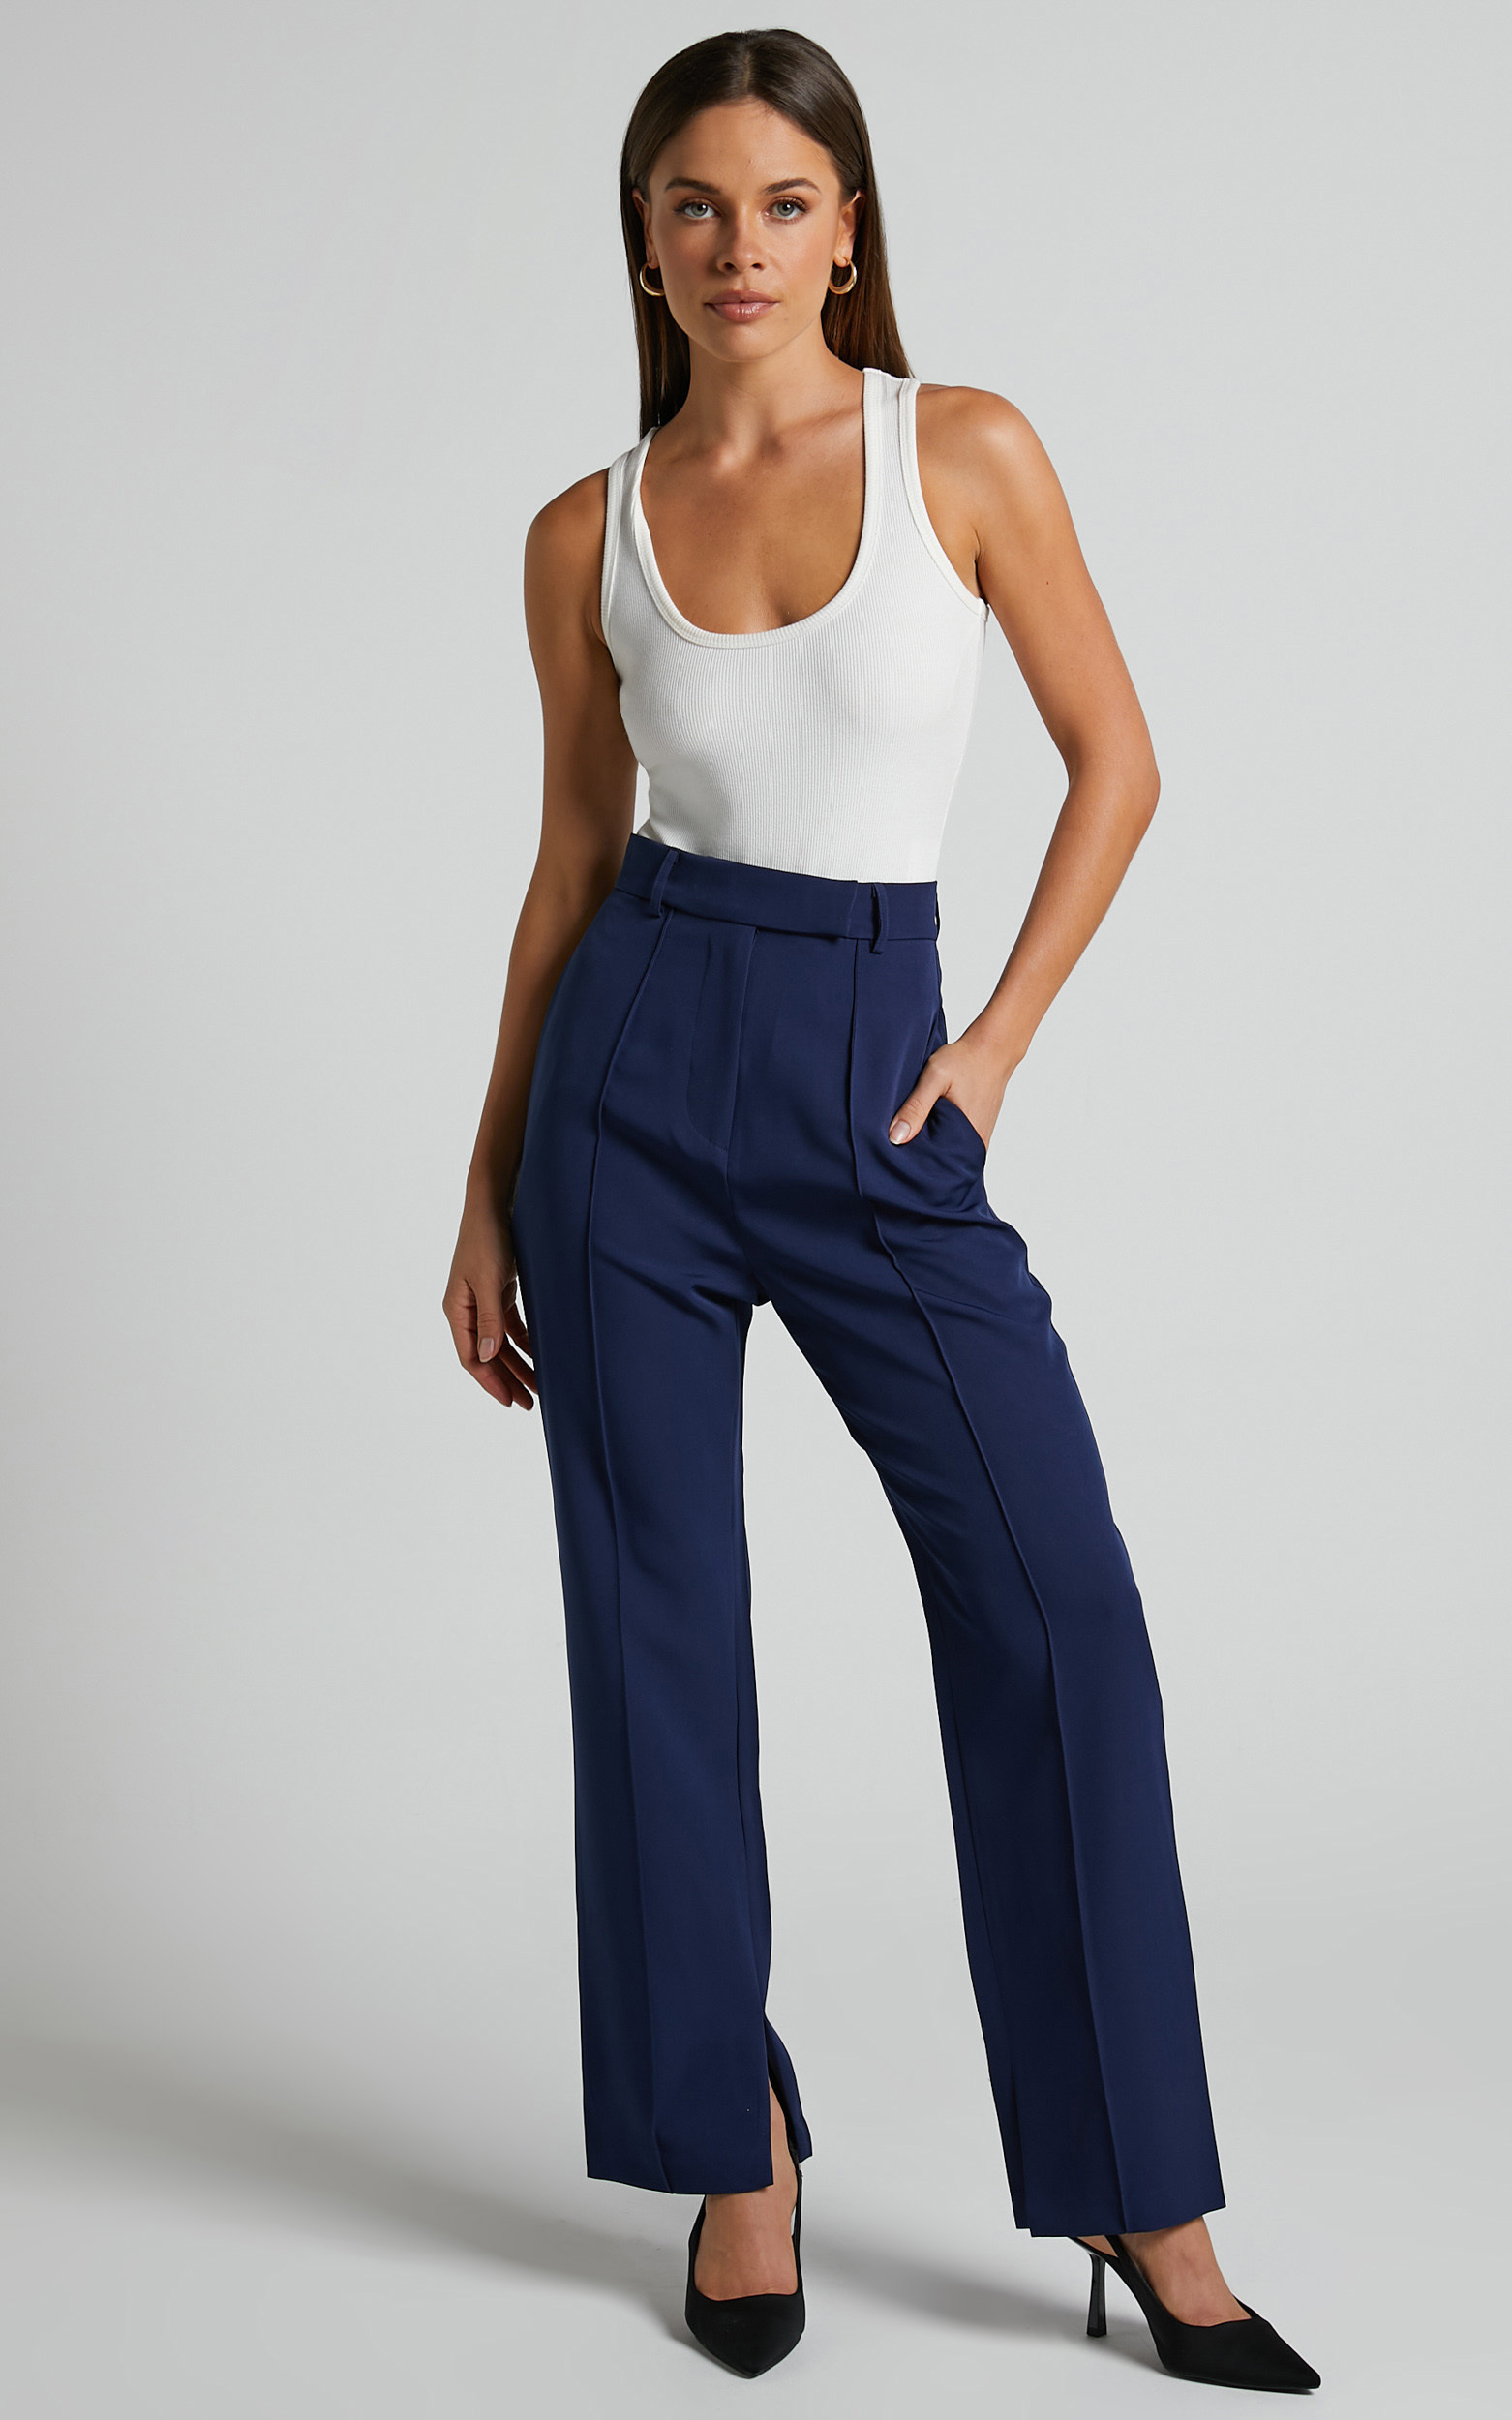 Rogers - High Waisted Pants in Navy - 06, NVY1, hi-res image number null